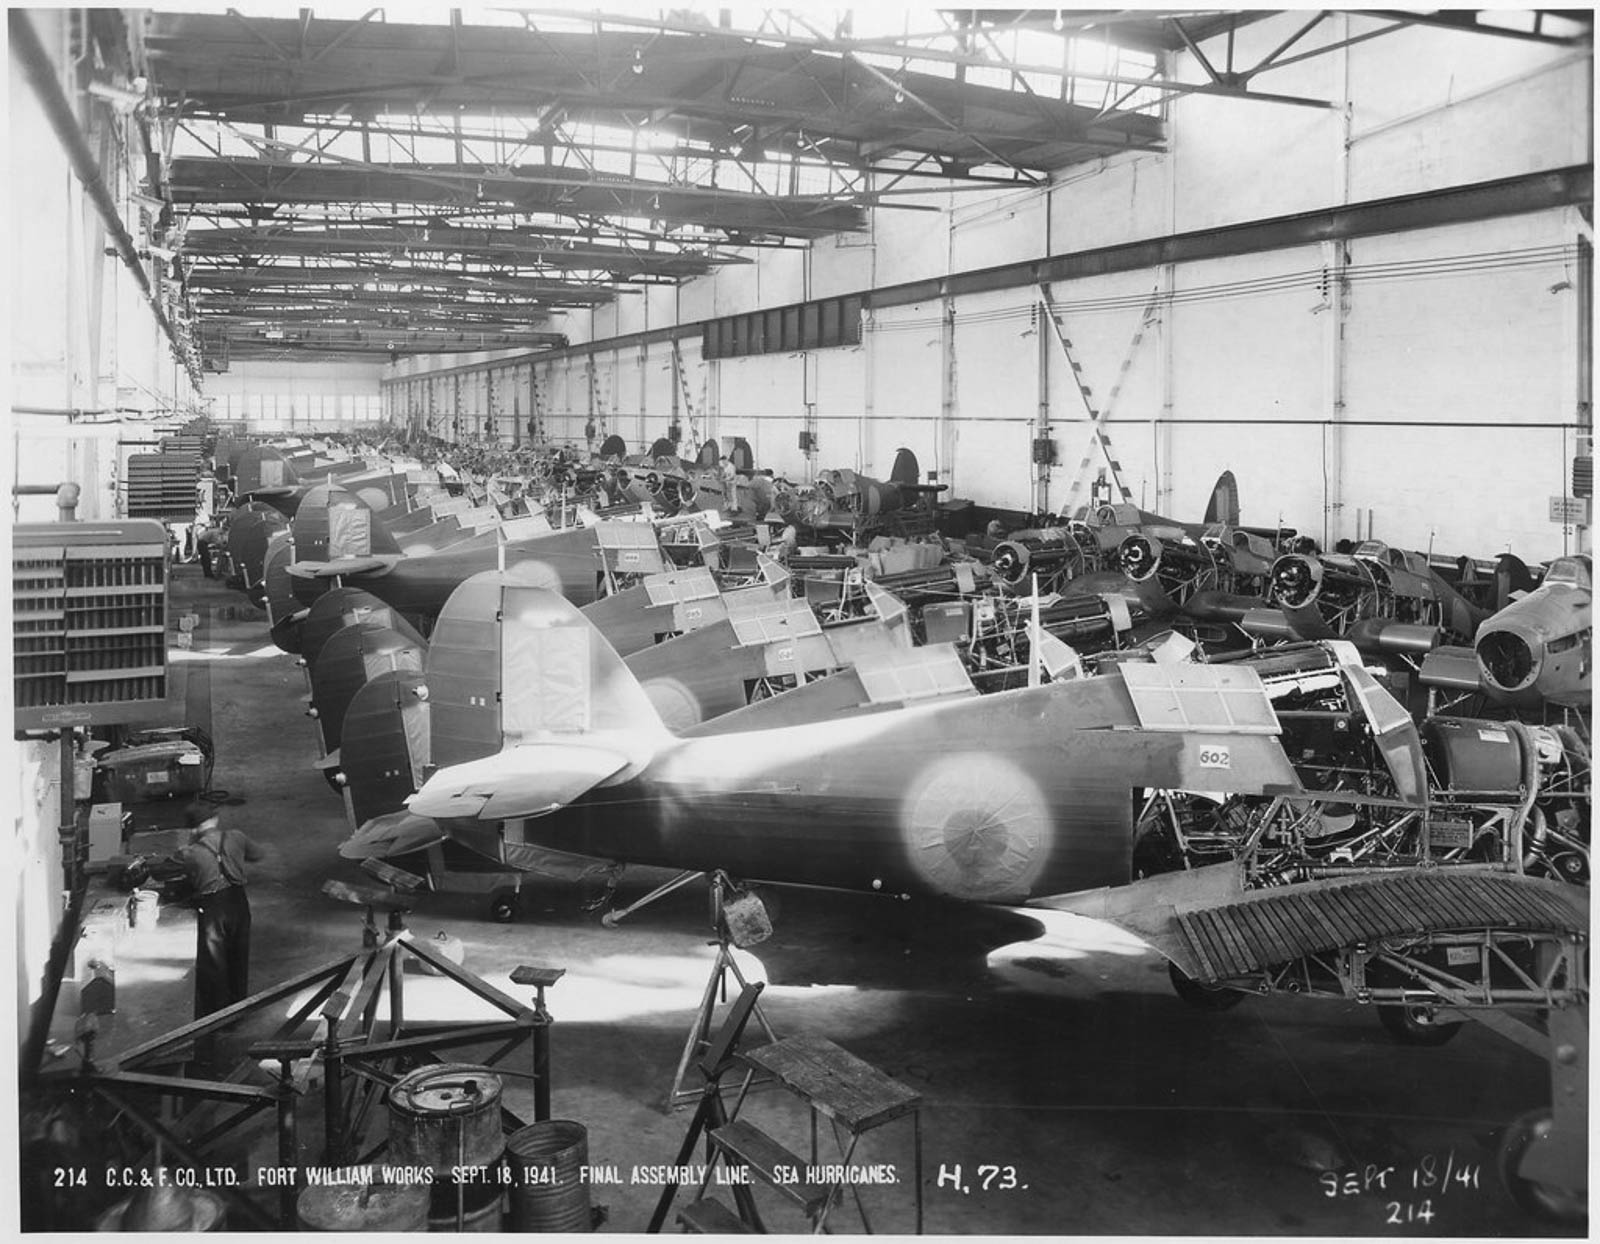 Hawker Sea Hurricanes Under Construction At Cancar Factory In Fort William, Ontario During September, 1941